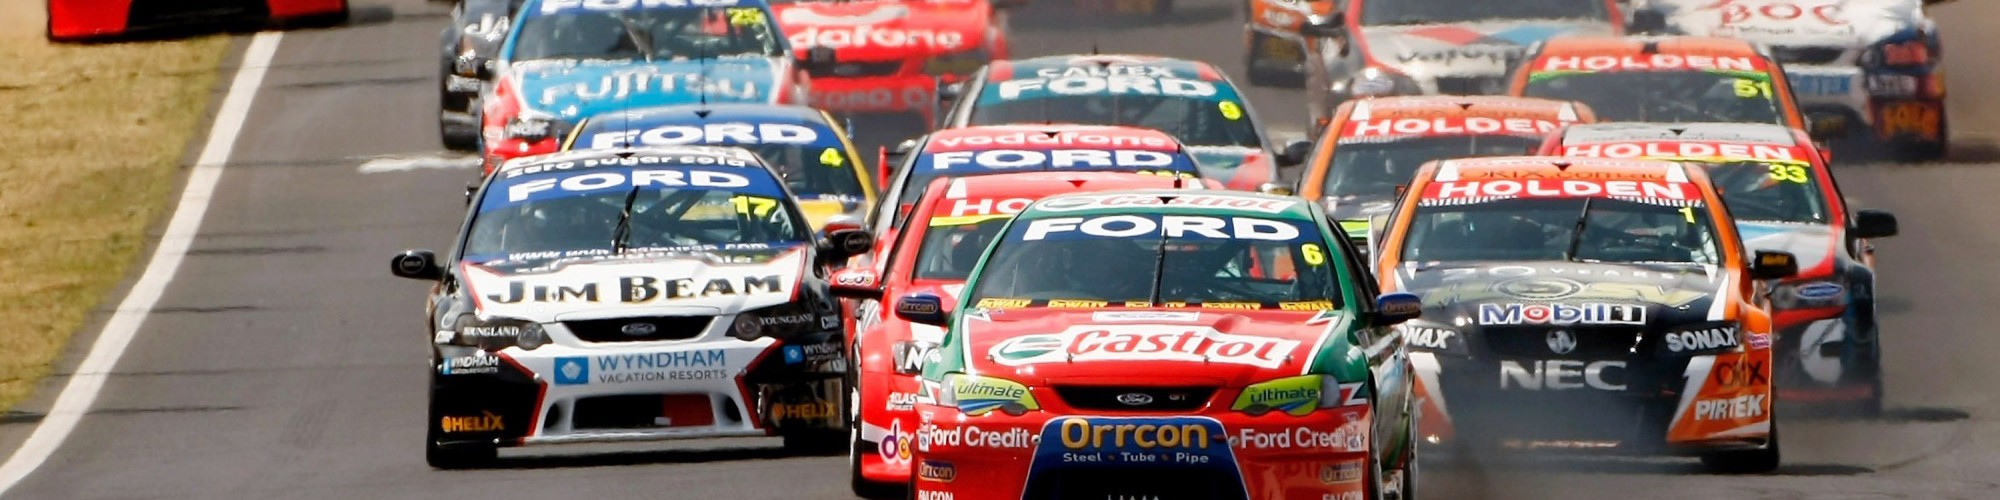 Supercars cover image